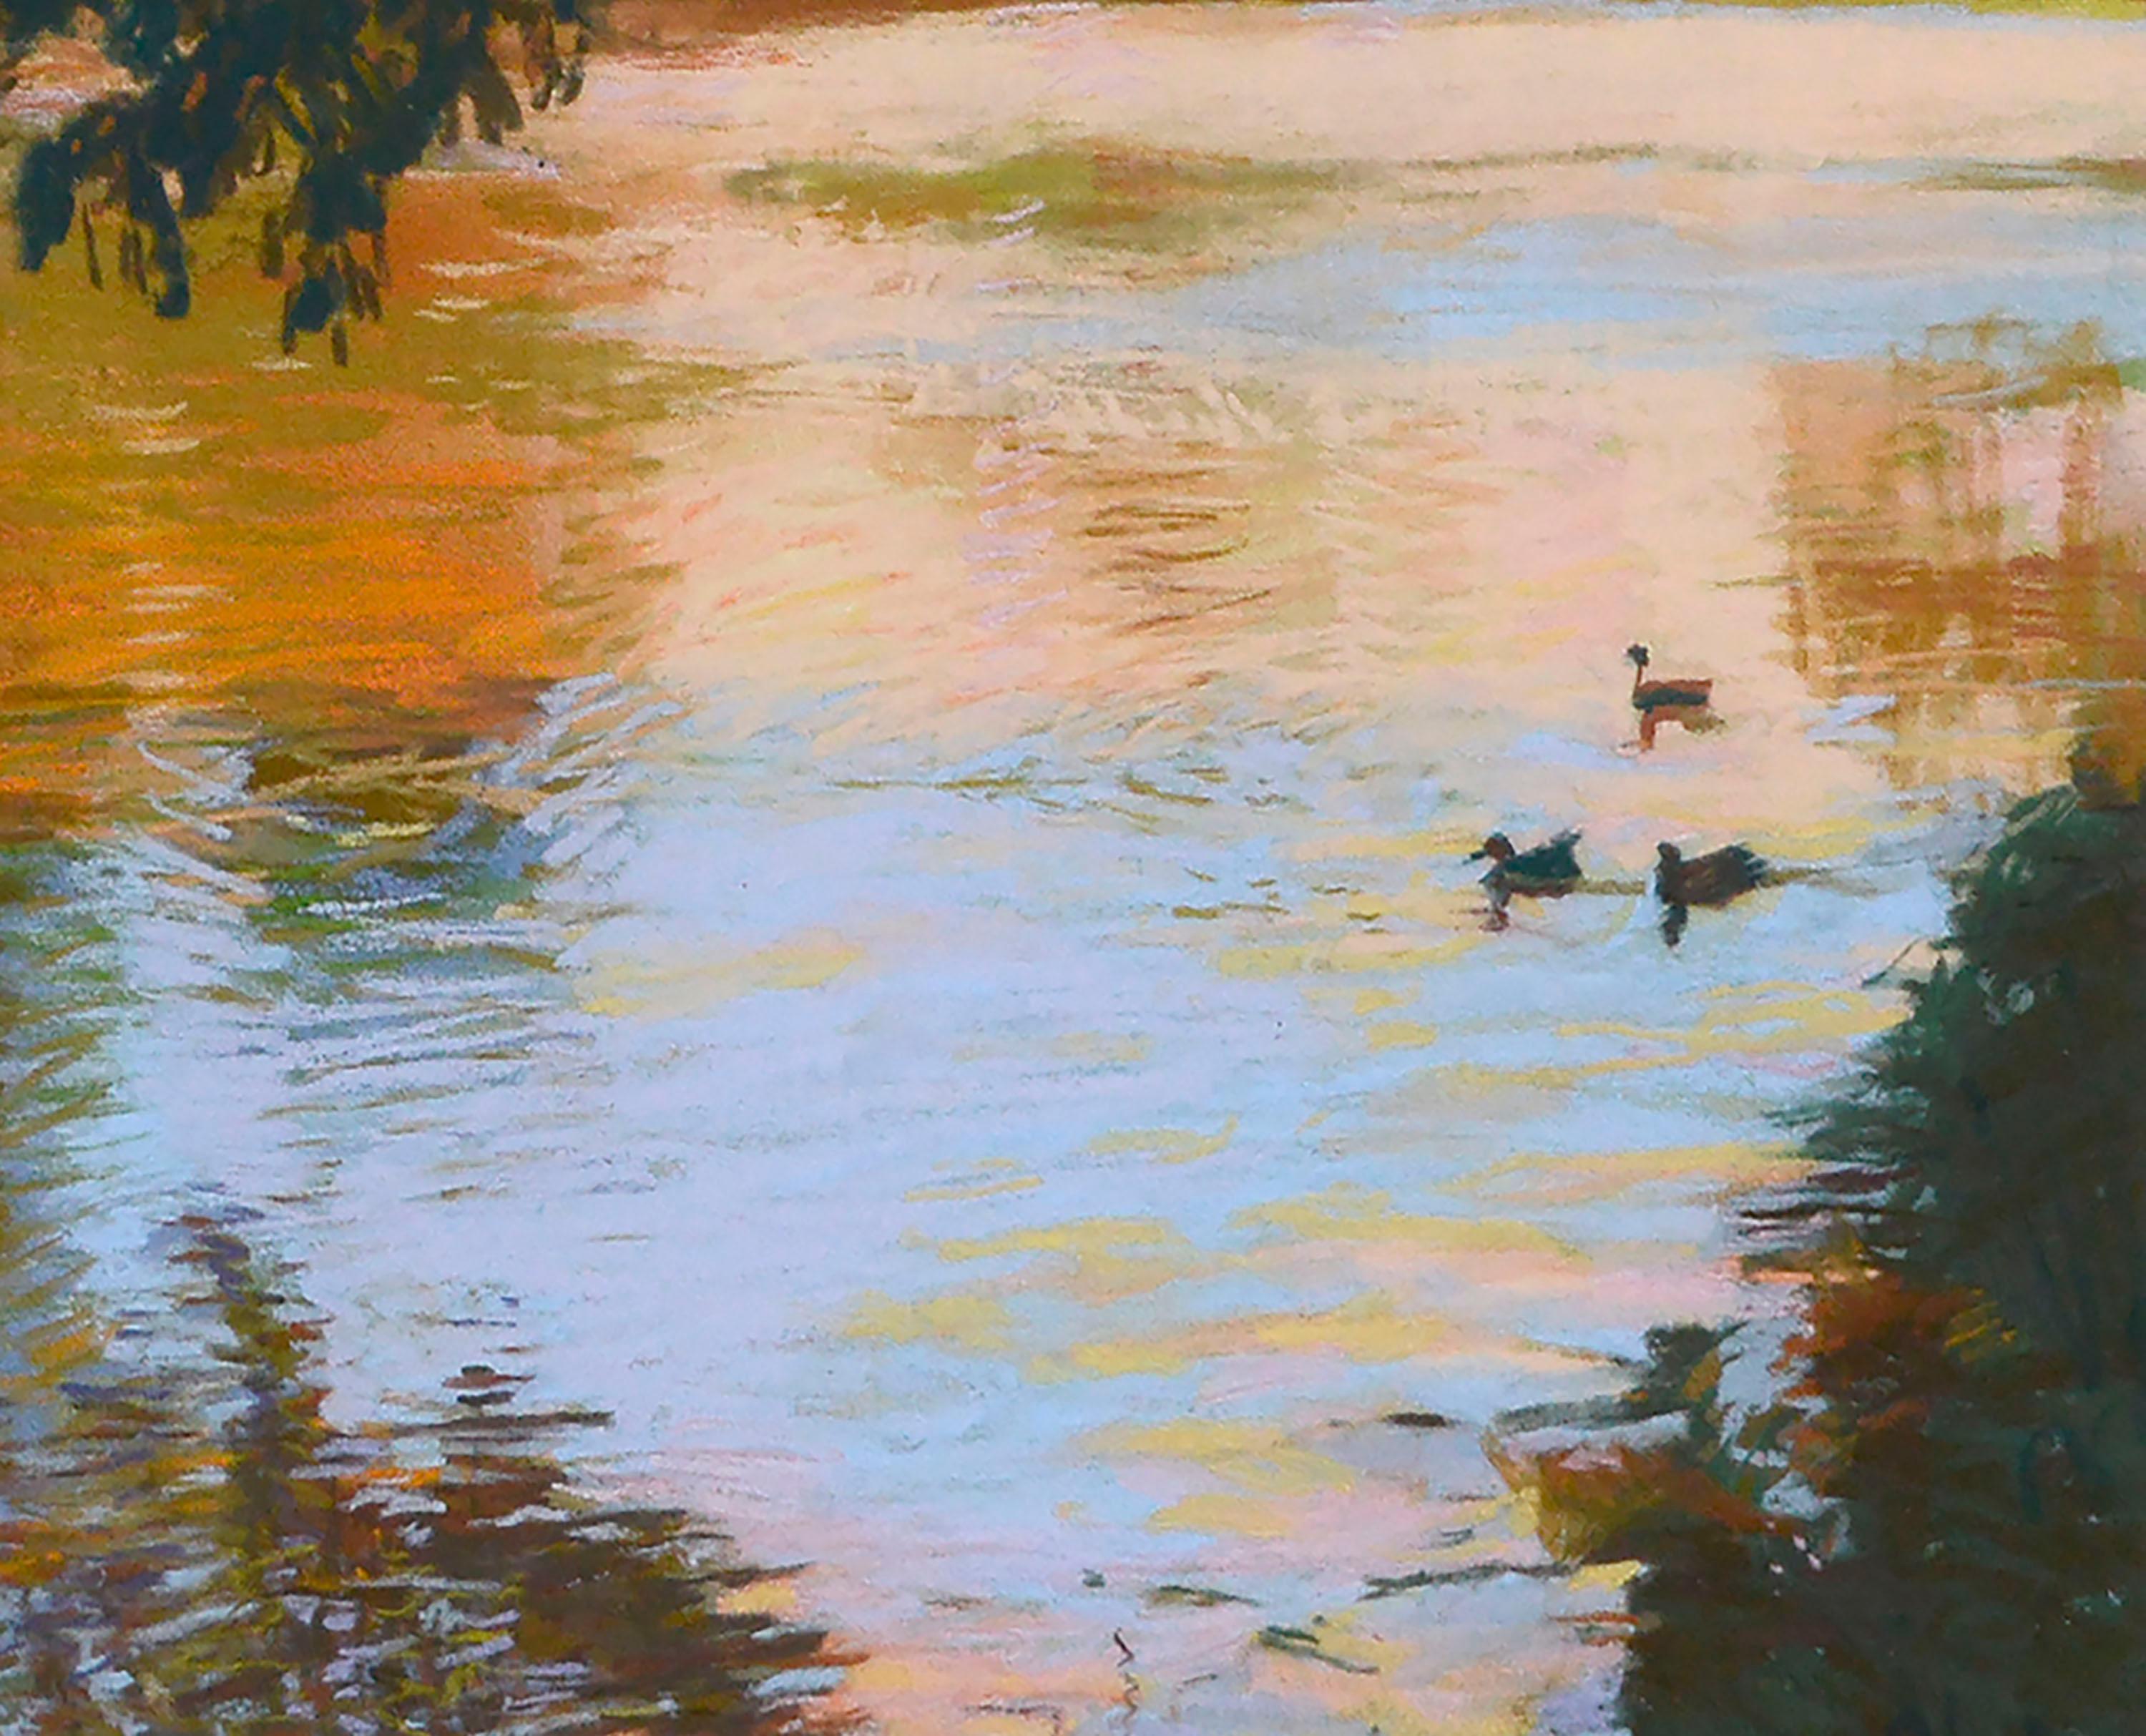 Colorful Lake Reflections, Large-Scale Pastel Landscape with Ducks - Post-Impressionist Art by Unknown